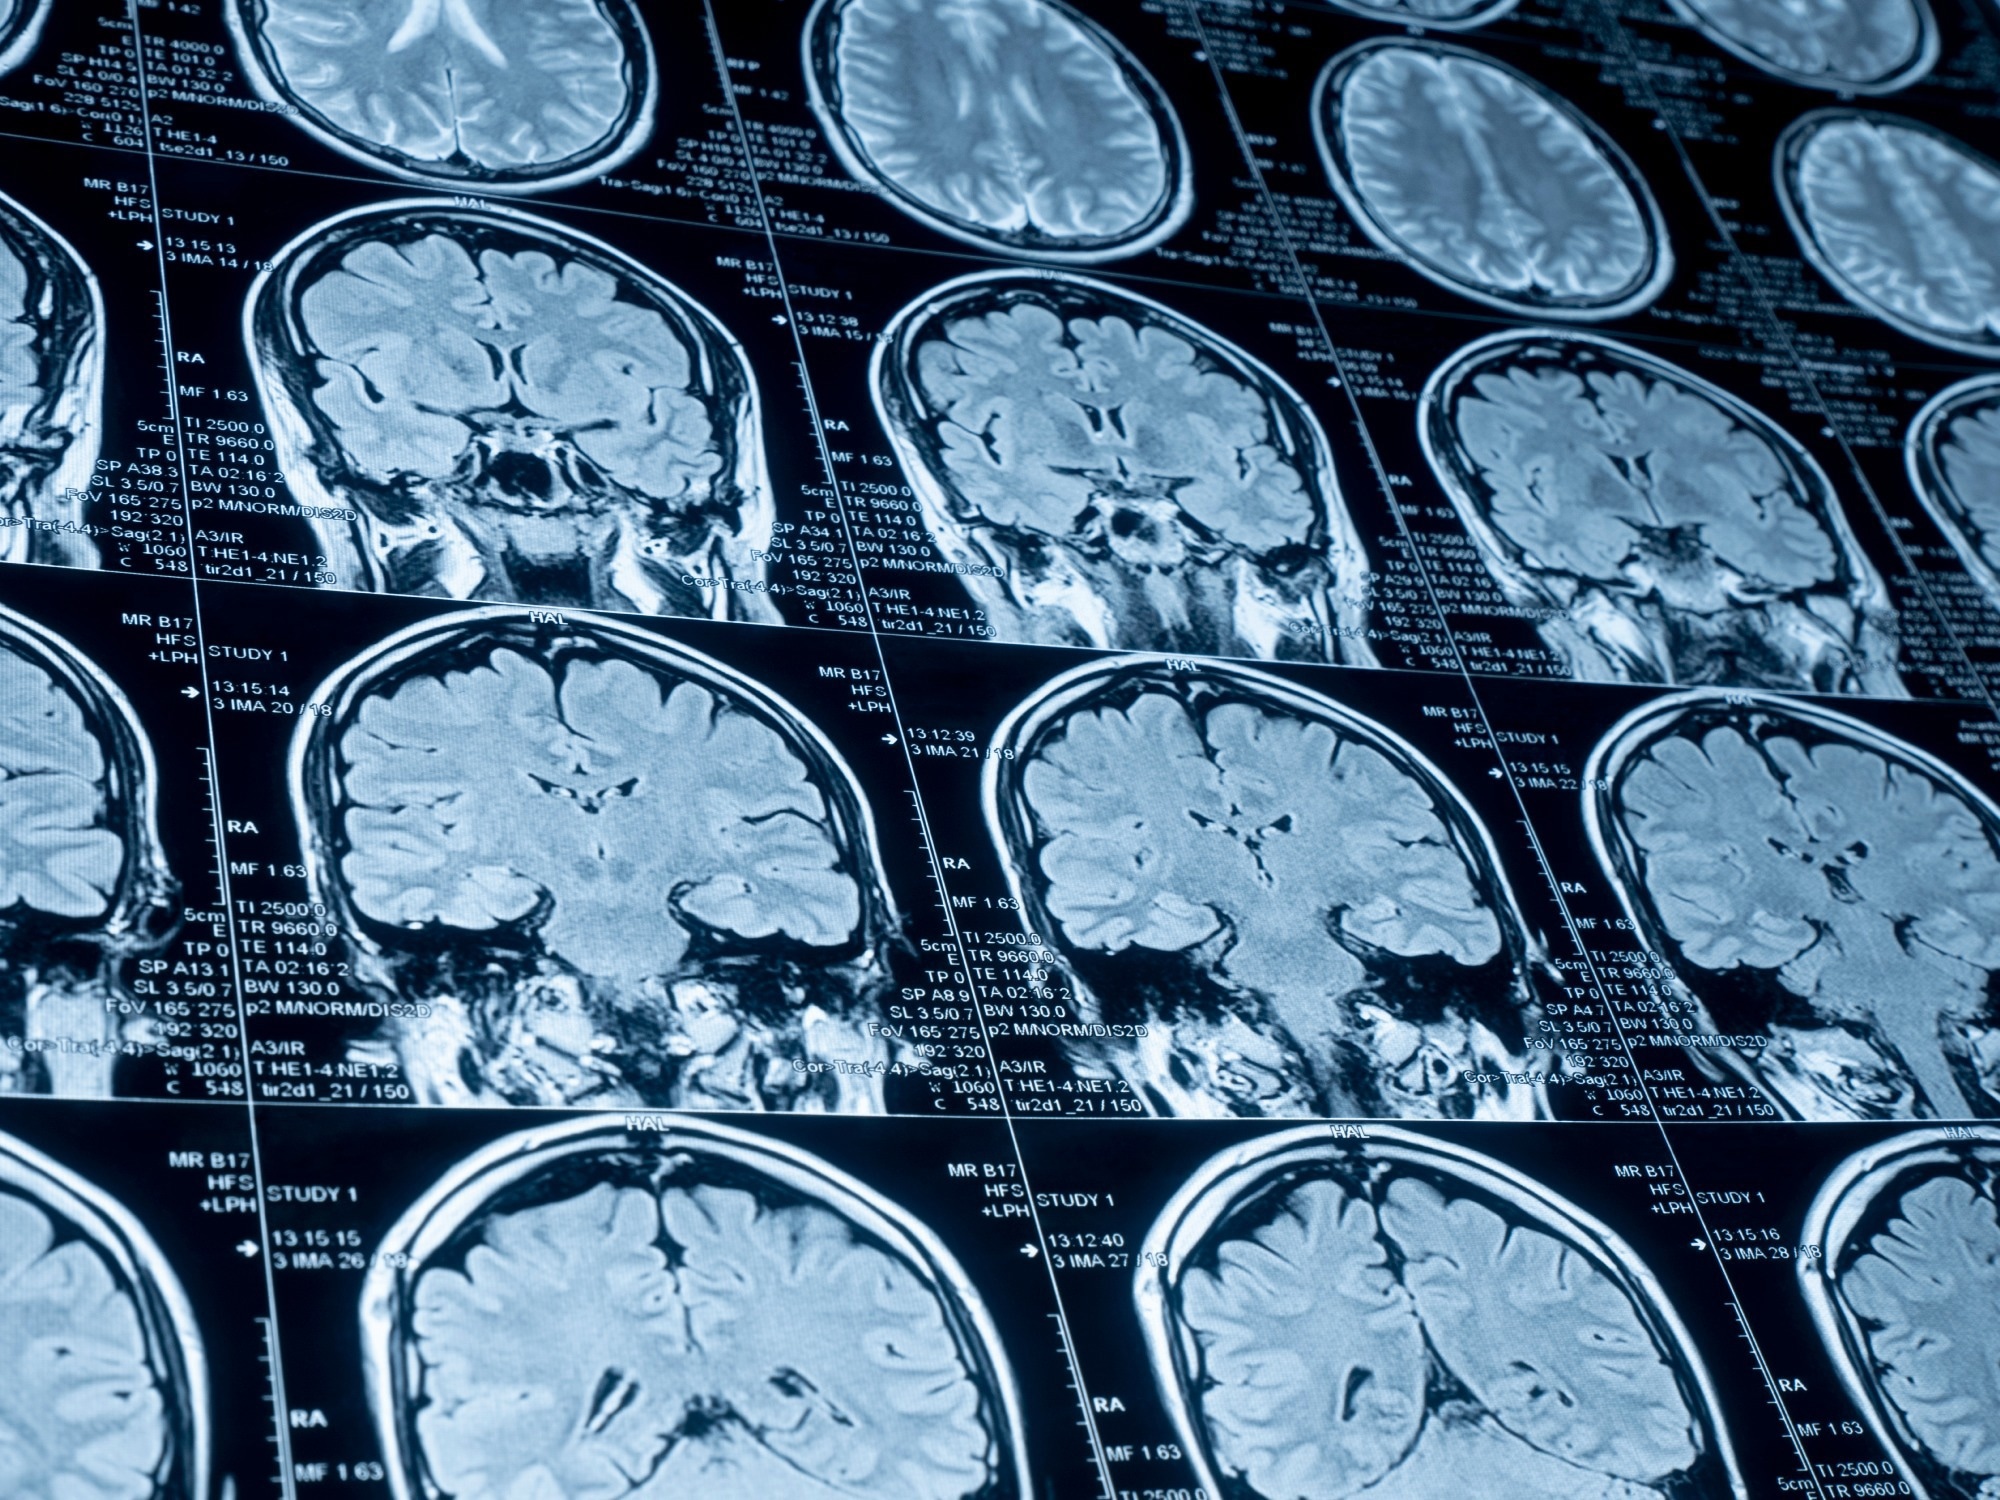 Study: Gray Matter Thickness and Subcortical Nuclear Volume in Men After SARS-CoV-2 Omicron Infection. Image Credit: ALEXSTAND / Shutterstock.com